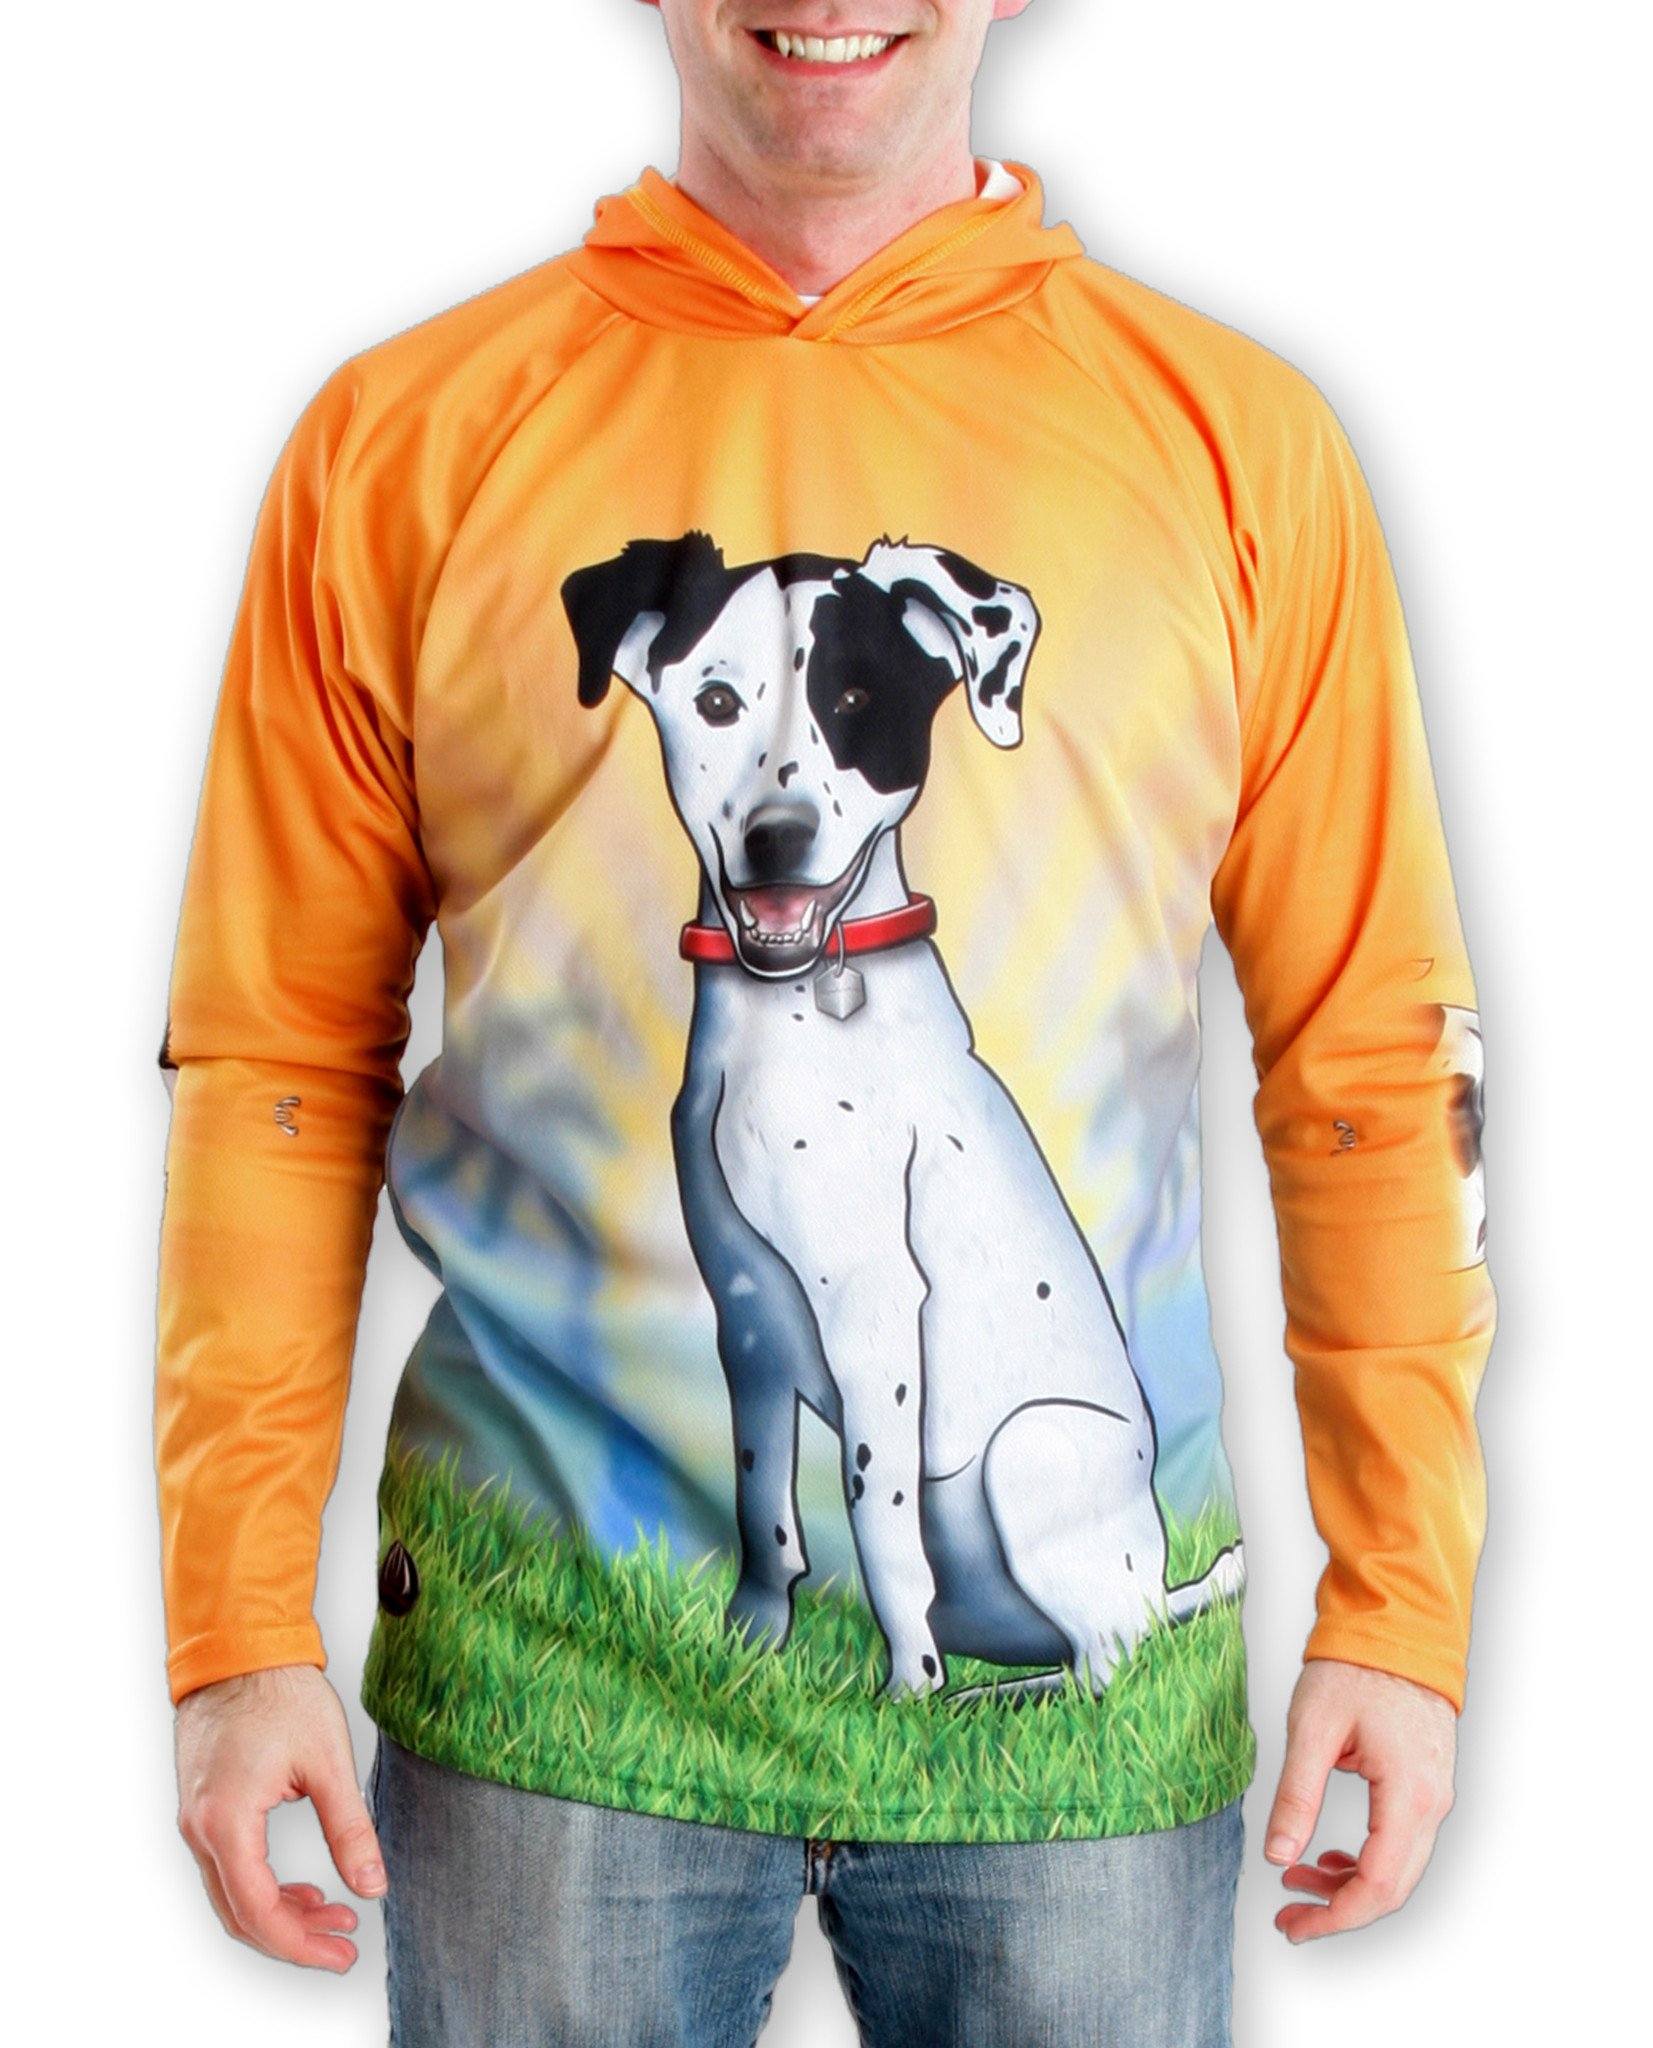 HOUND DOG Hoodie Sport Shirt by MOUTHMAN® Kid's Clothing 